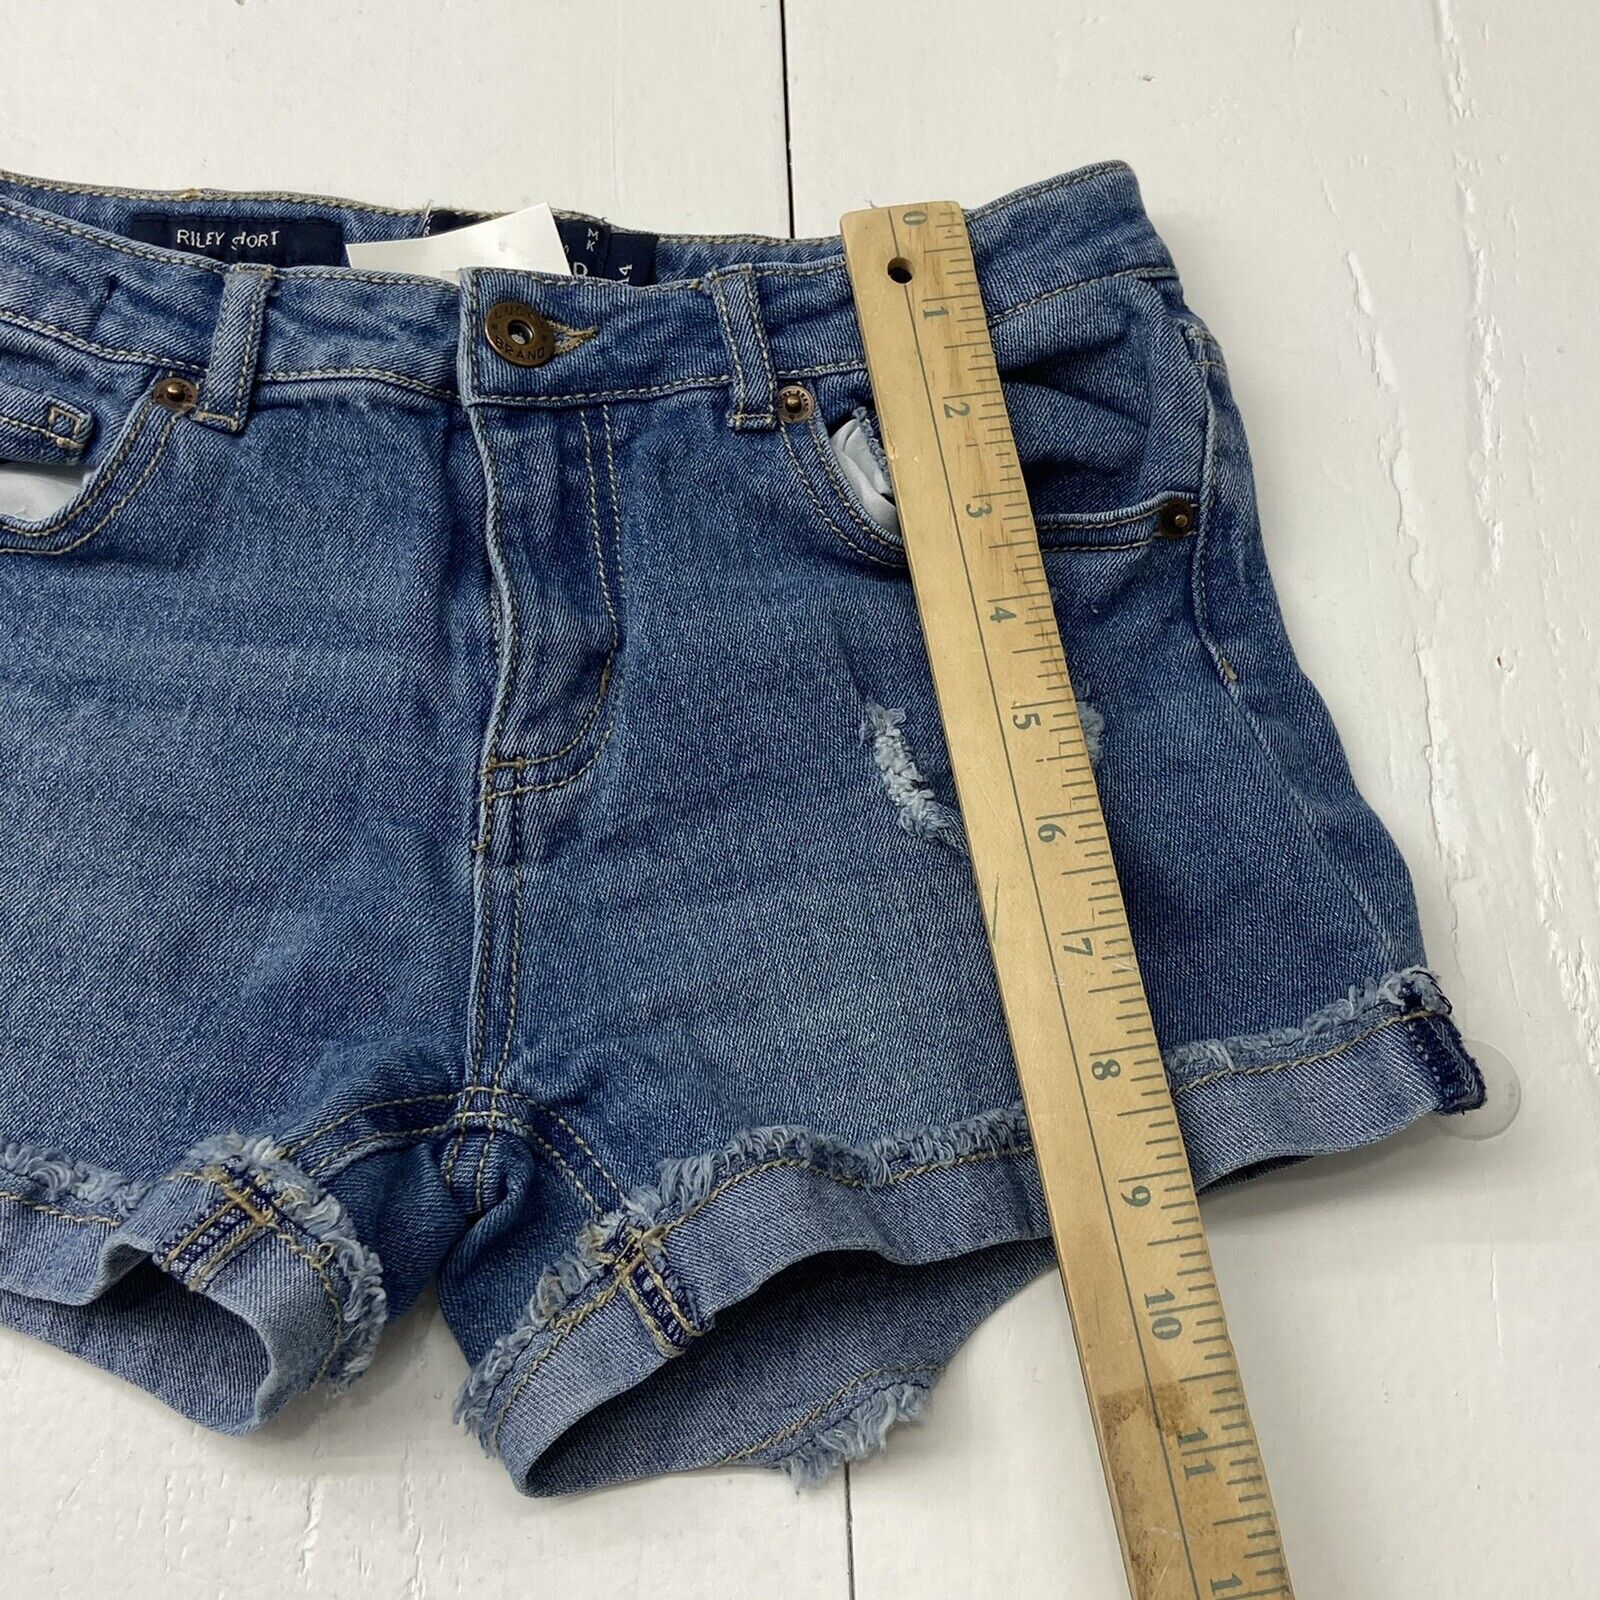 Lucky Brand Womens Shorts in Womens Clothing 